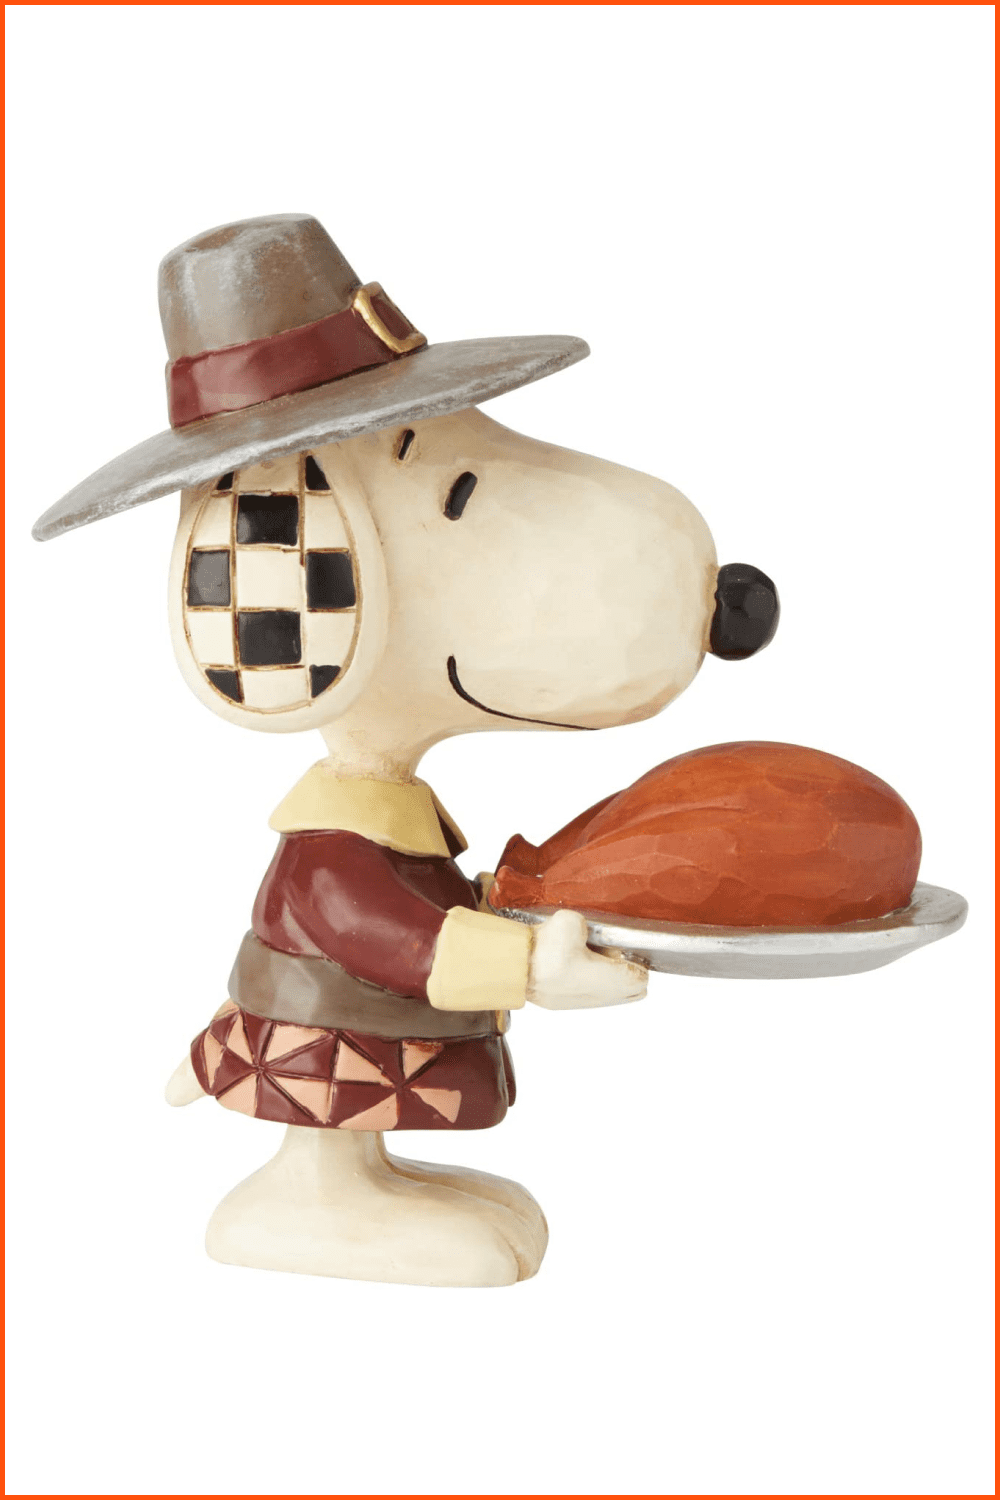 Clay Snoopy dog in a hat and with a turkey on a plate.